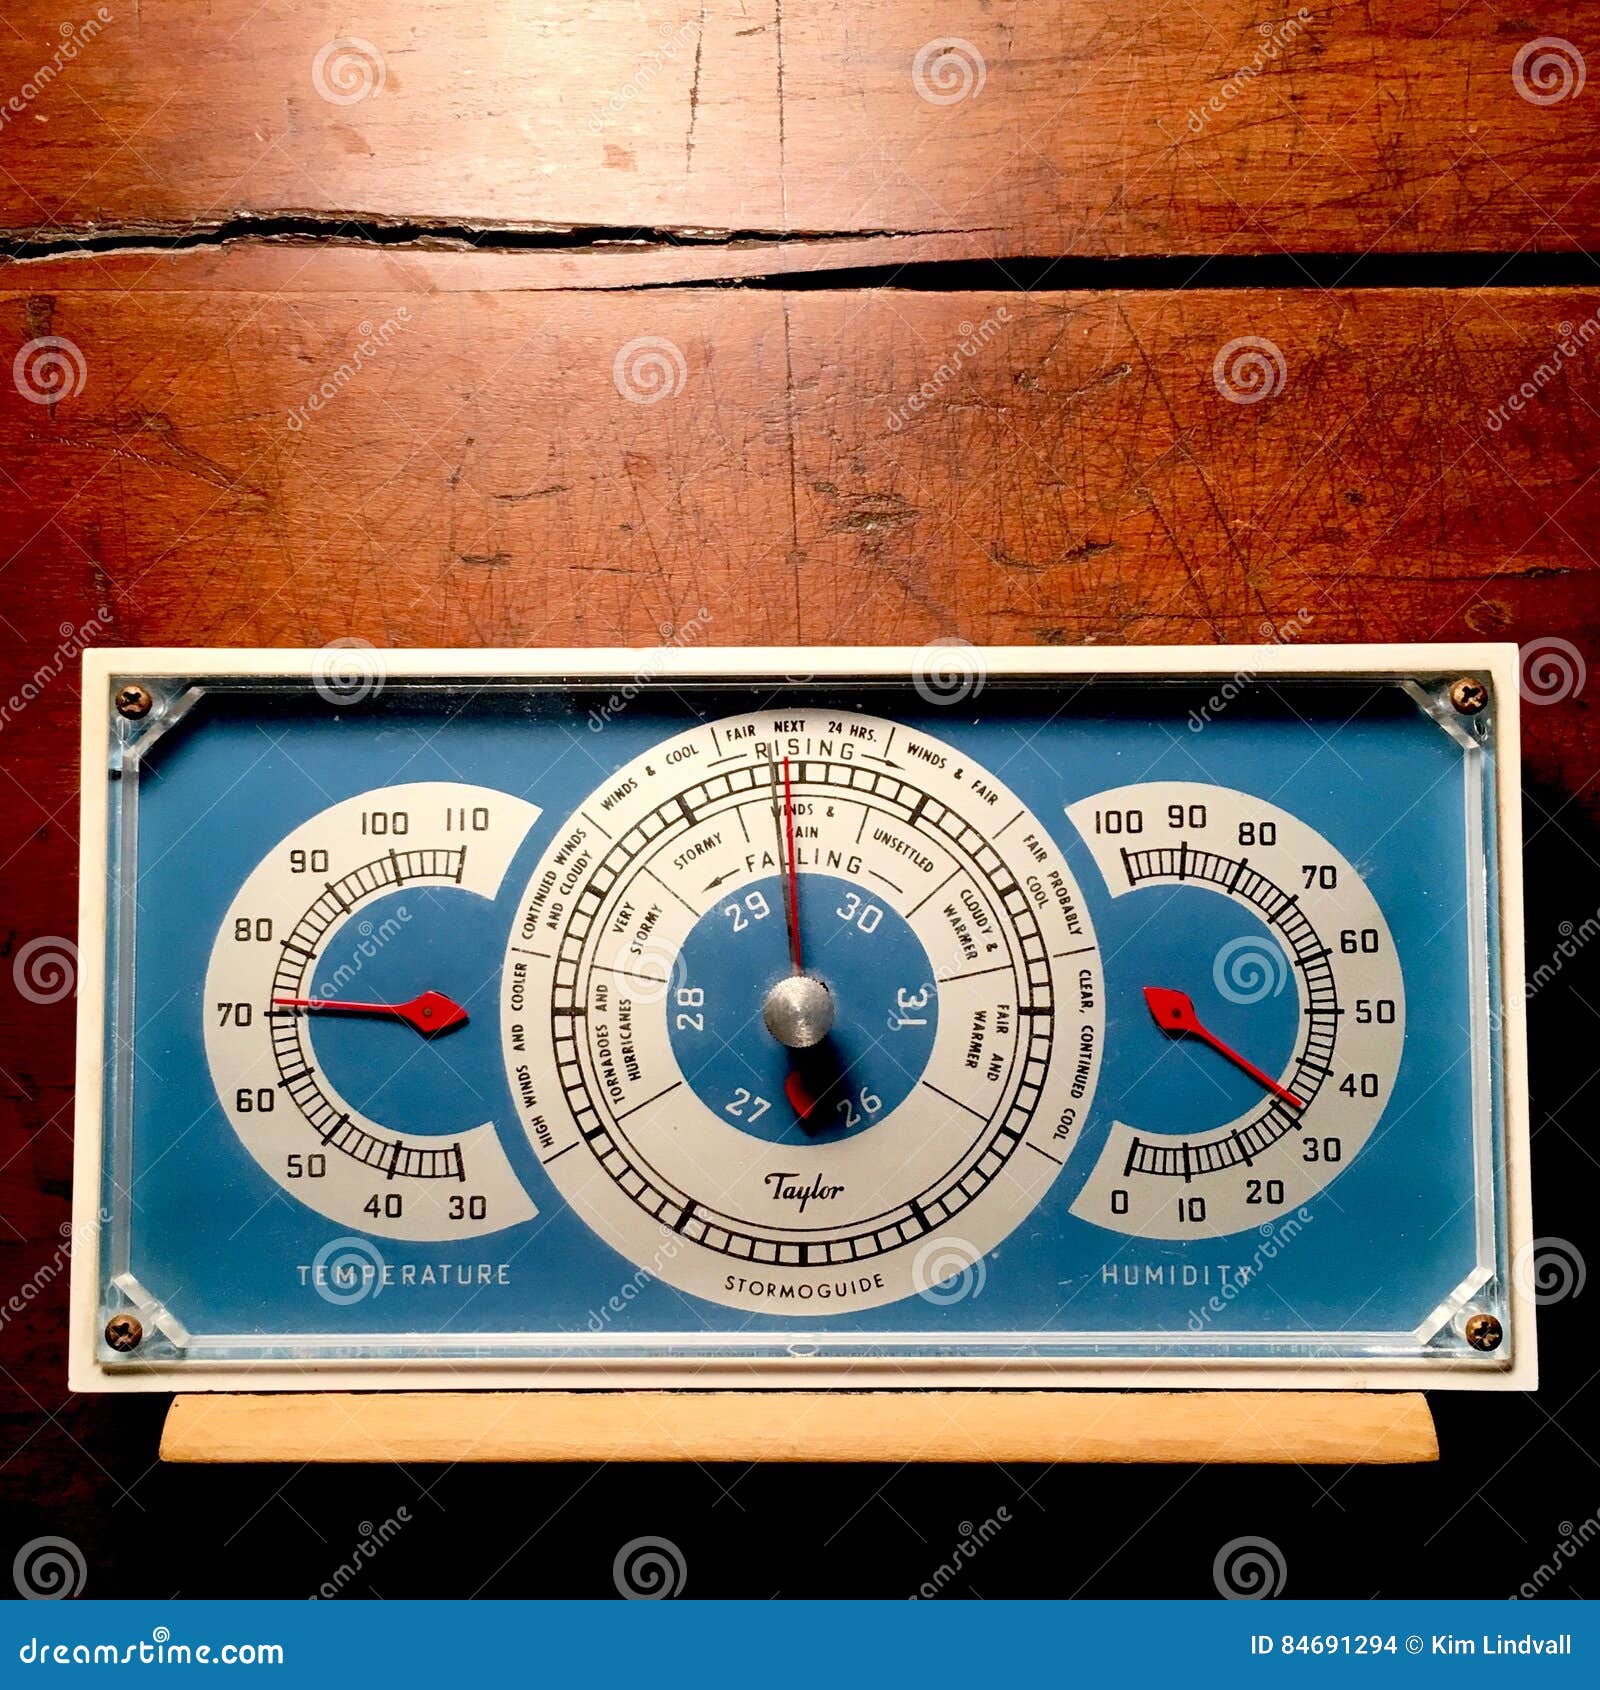 https://thumbs.dreamstime.com/z/vintage-barometer-thermometer-hygrometer-shown-against-weathered-wood-background-retro-has-space-text-84691294.jpg